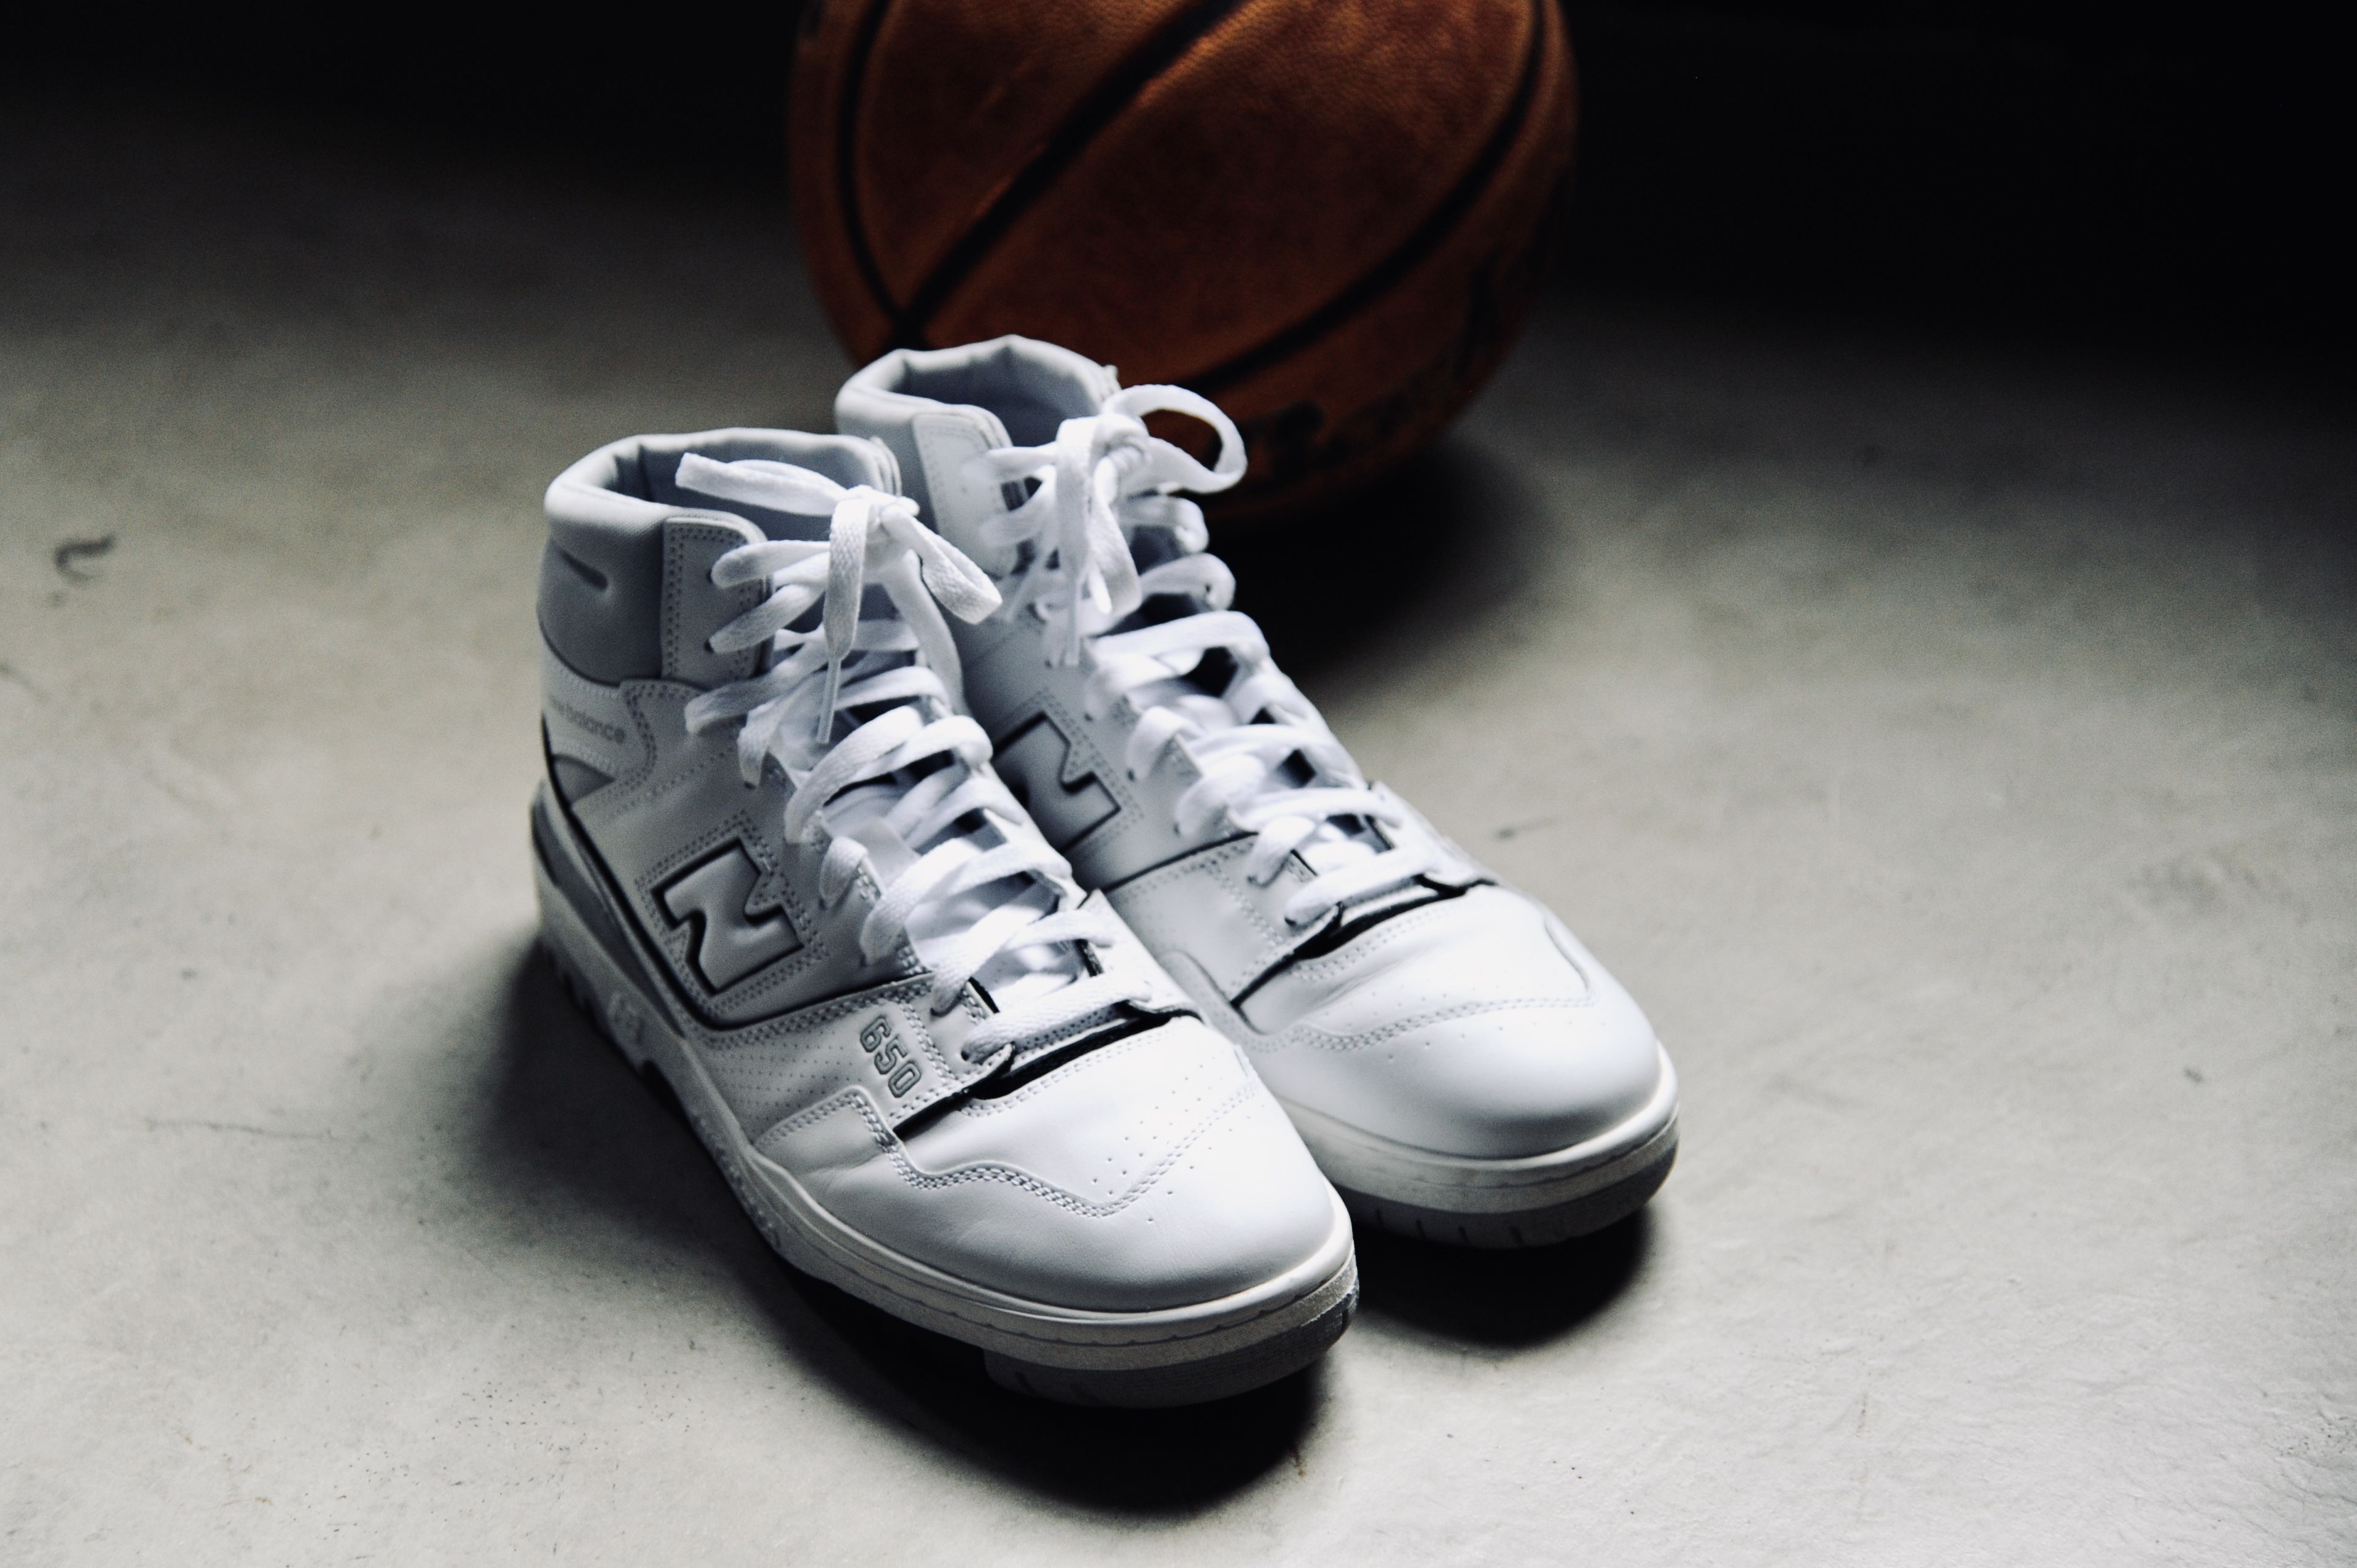 New Balance Basketball Athletic Shoes for Men